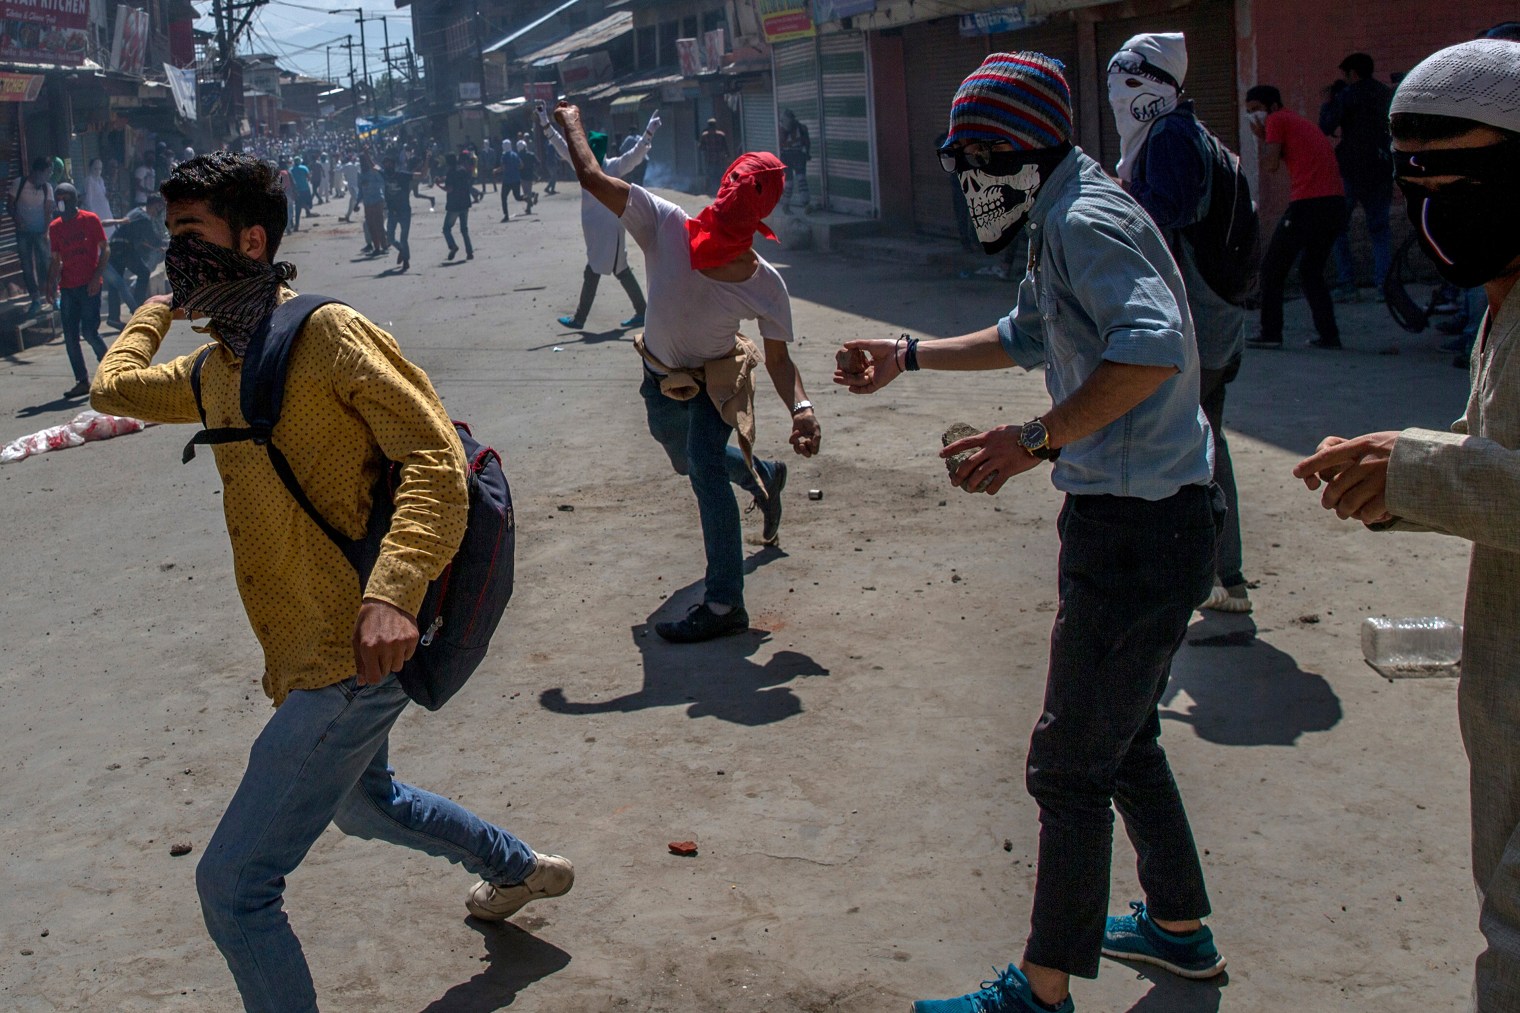 Kashmiri protesters throw rocks and bricks at Indian policemen during a protest in Srinagar on June 2, 2017. Government forces fired tear gas and pellets on Kashmiris who gathered after Friday afternoon prayers to protest against Indian rule.